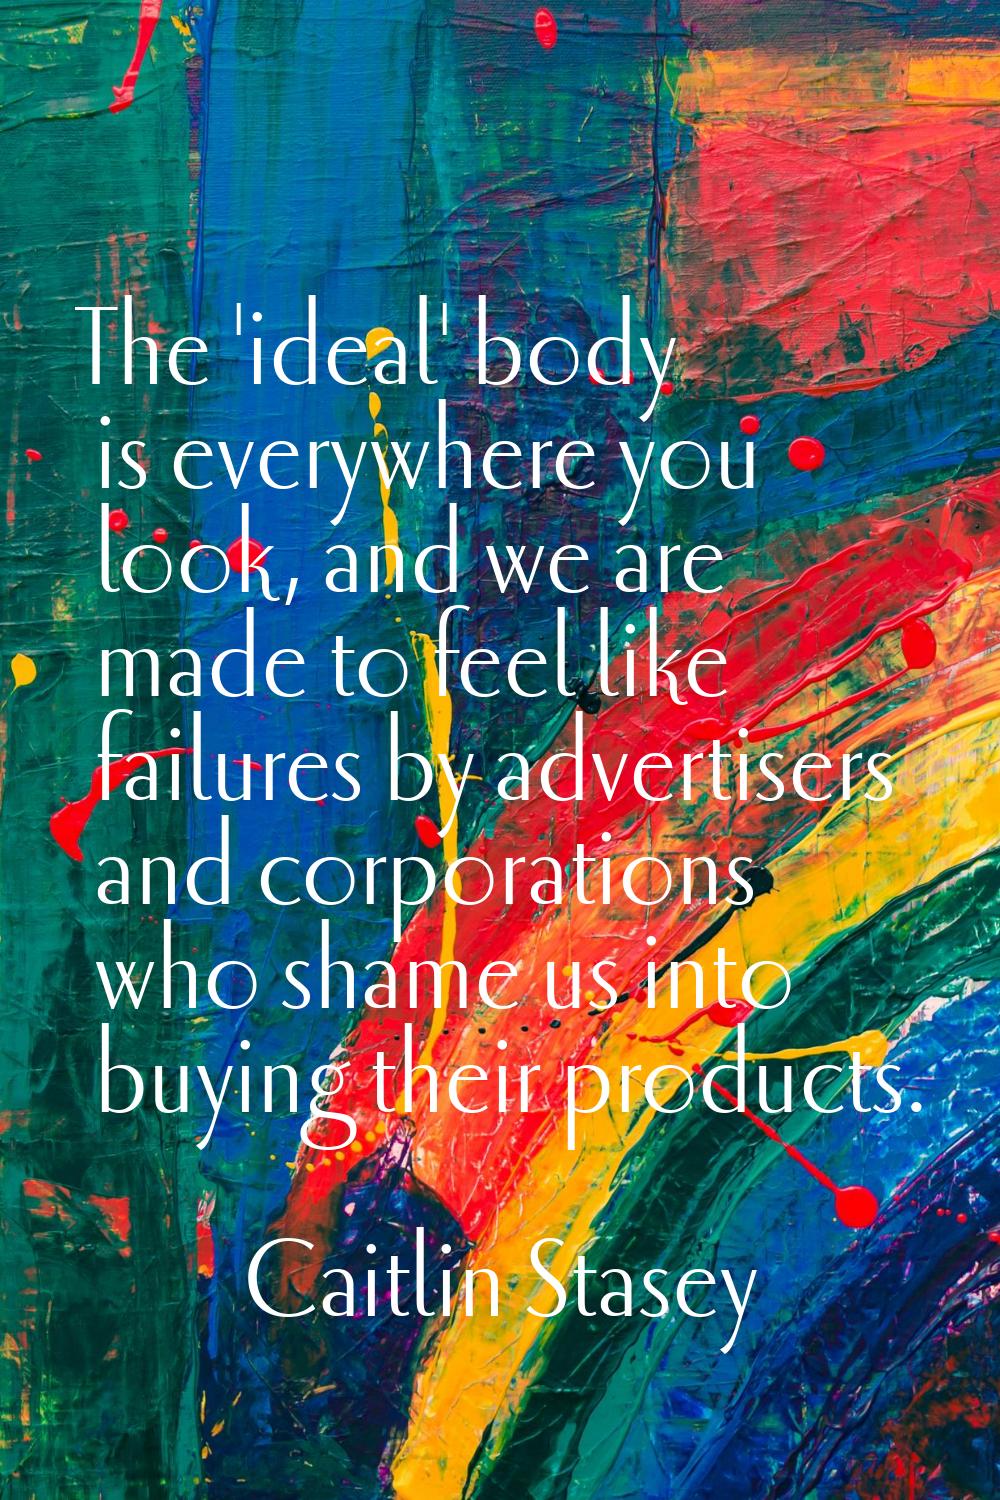 The 'ideal' body is everywhere you look, and we are made to feel like failures by advertisers and c